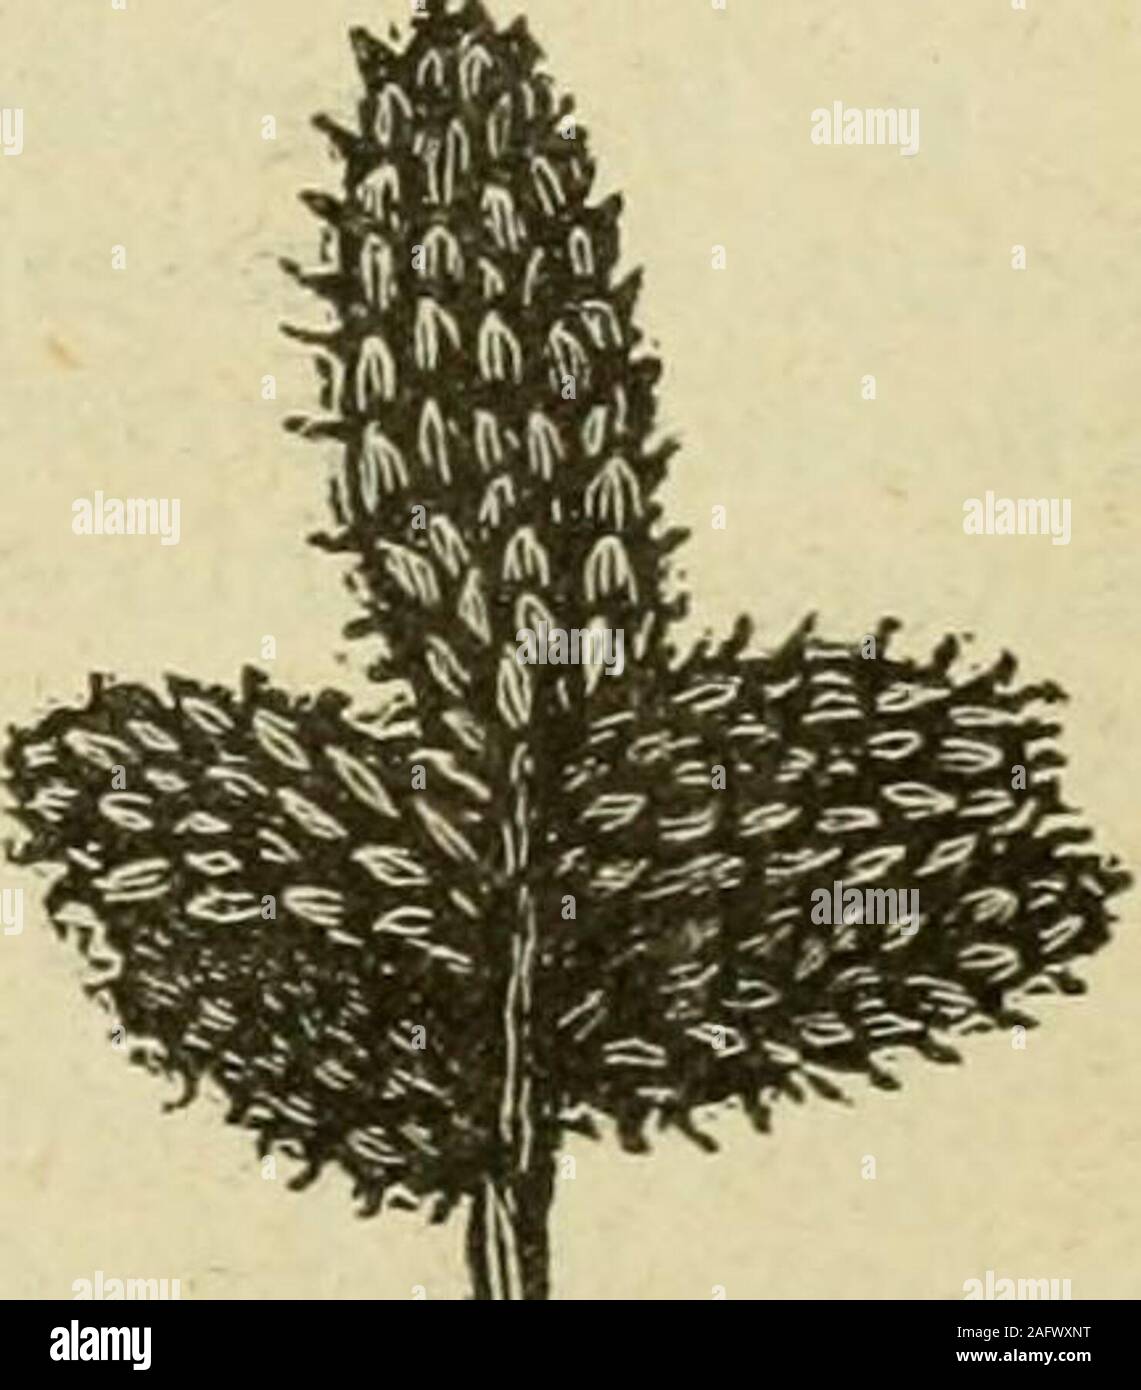 . Flora of Syria, Palestine, and Sinai : from the Taurus to Ras Muhammas and from the Mediterranean sea to the Syrian desert. 315. M. amplcxicaulis, Vahl. © ^Adu. .1 to.3, glaucous; stem at length often induratedbelow, branching from base; branches horizontaland ascending, nodular. Leaves minute, alter-nate, half-globular, clasping, obtuse, with rudi-mentary lamina. Spikes sessile, alternate, ob-long, .005 to .015 long, racemed; flowers con-nate to tip; stamen 1^— May to August — Coastnear Gaza, and southward to Egypt. TerminaLpikes of Halopeplis am-plexicaulis. 11. HAI.OC]^EMUM, M. B. Halocne Stock Photo